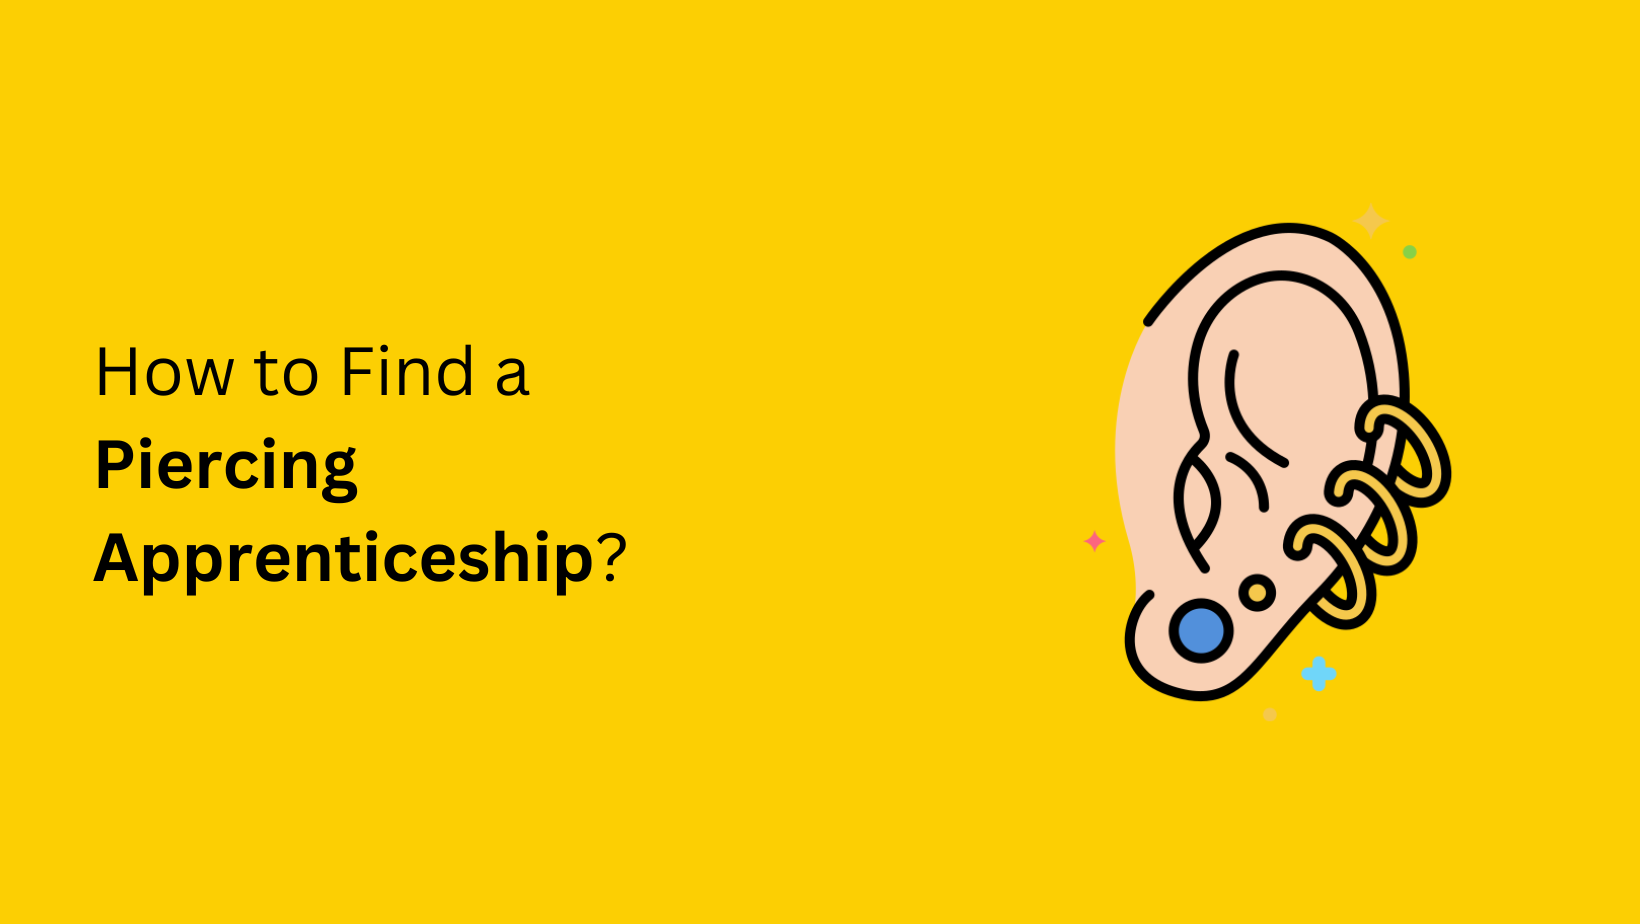 How to Find a Piercing Apprenticeship